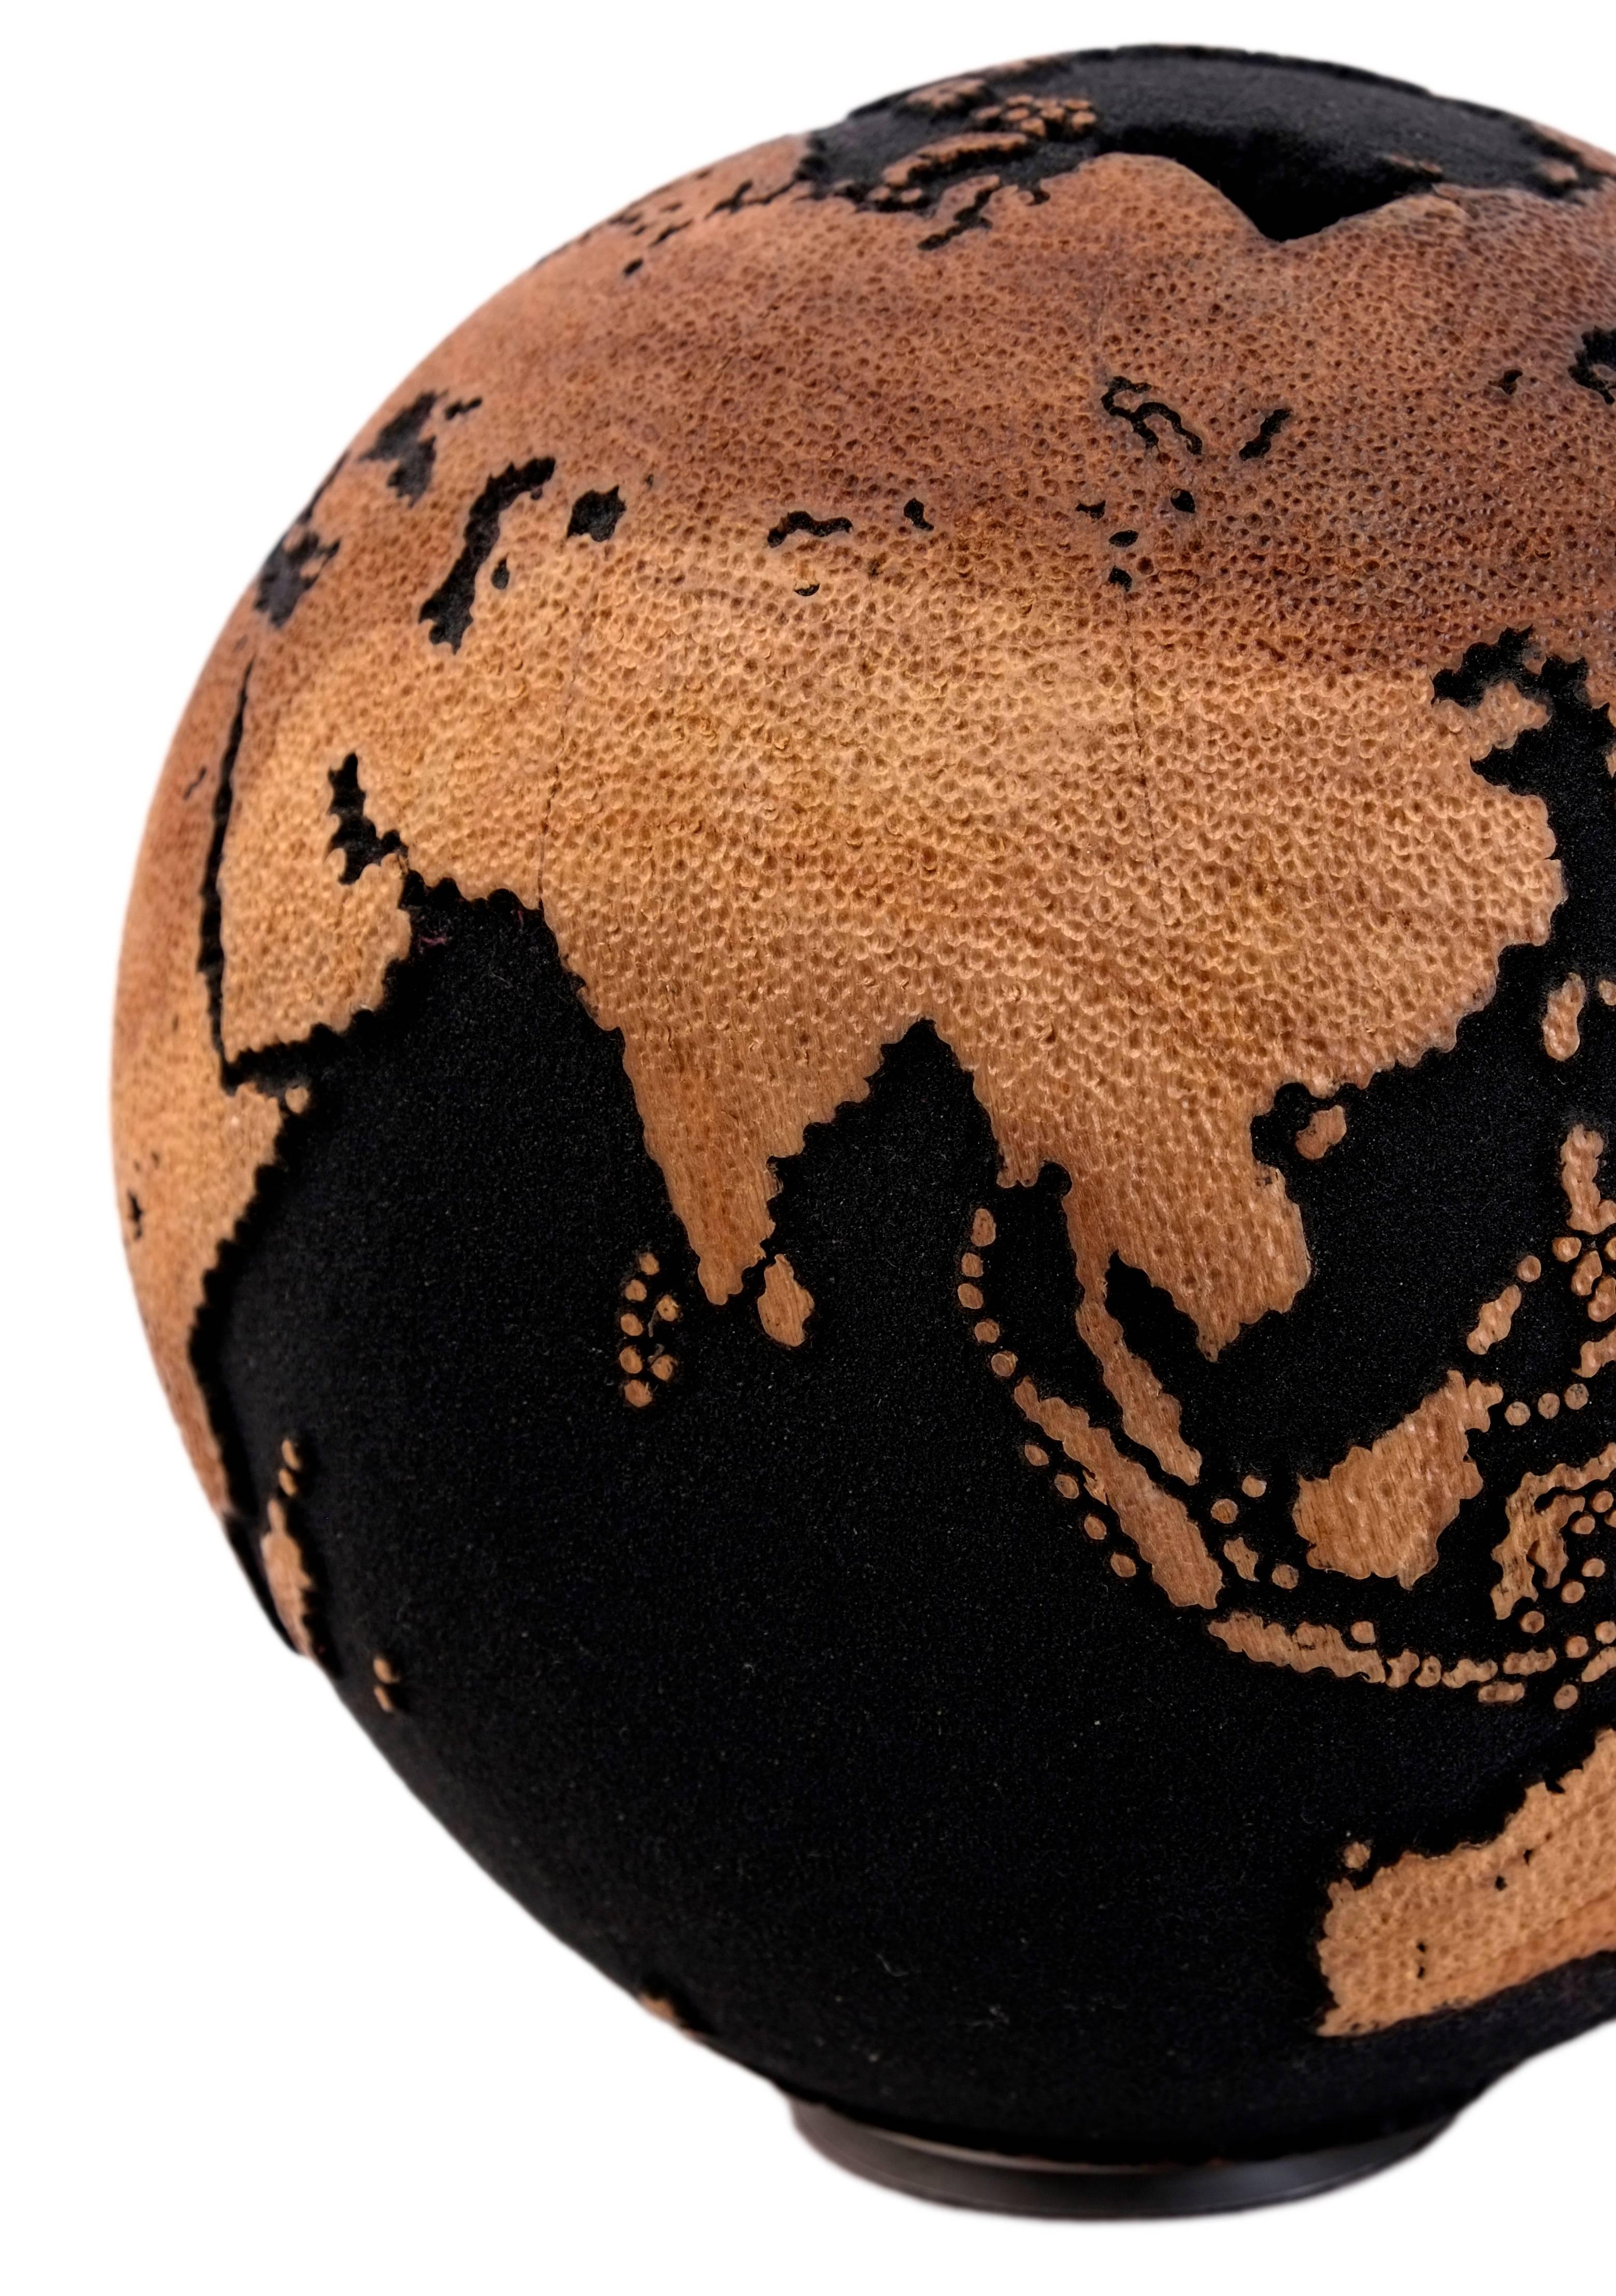 Organic Modern Volcanic Sand Globe with Hammered Skin Textured Continents, 25 cm, Saturday Sale For Sale